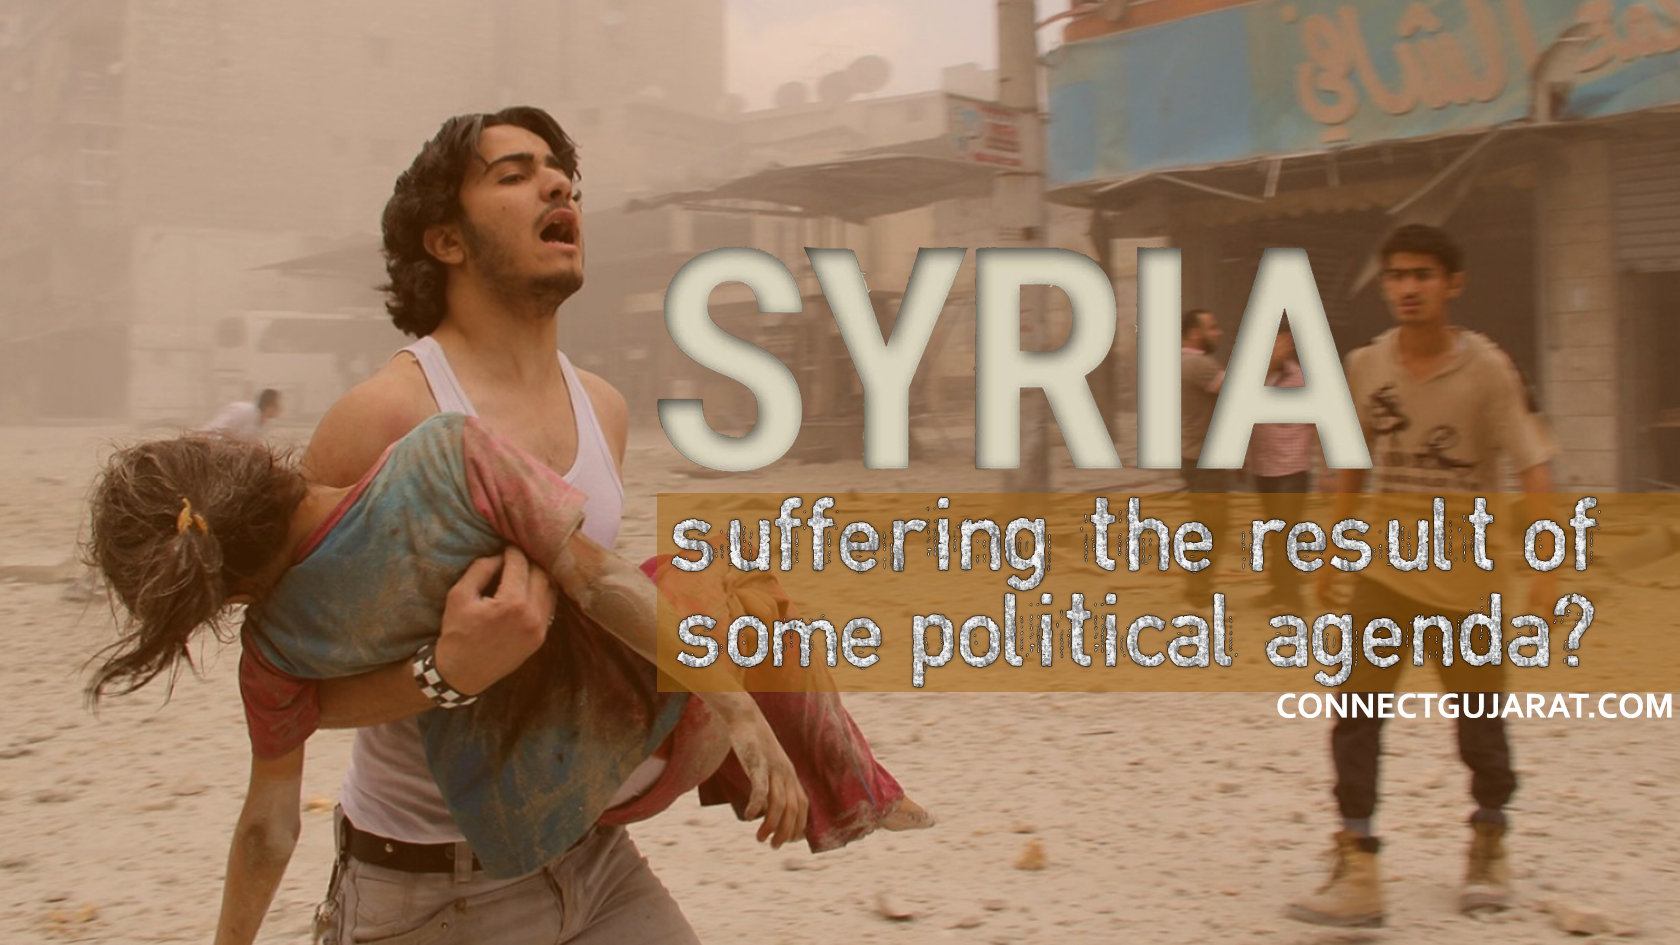 Is Syria suffering the result of some political agenda?